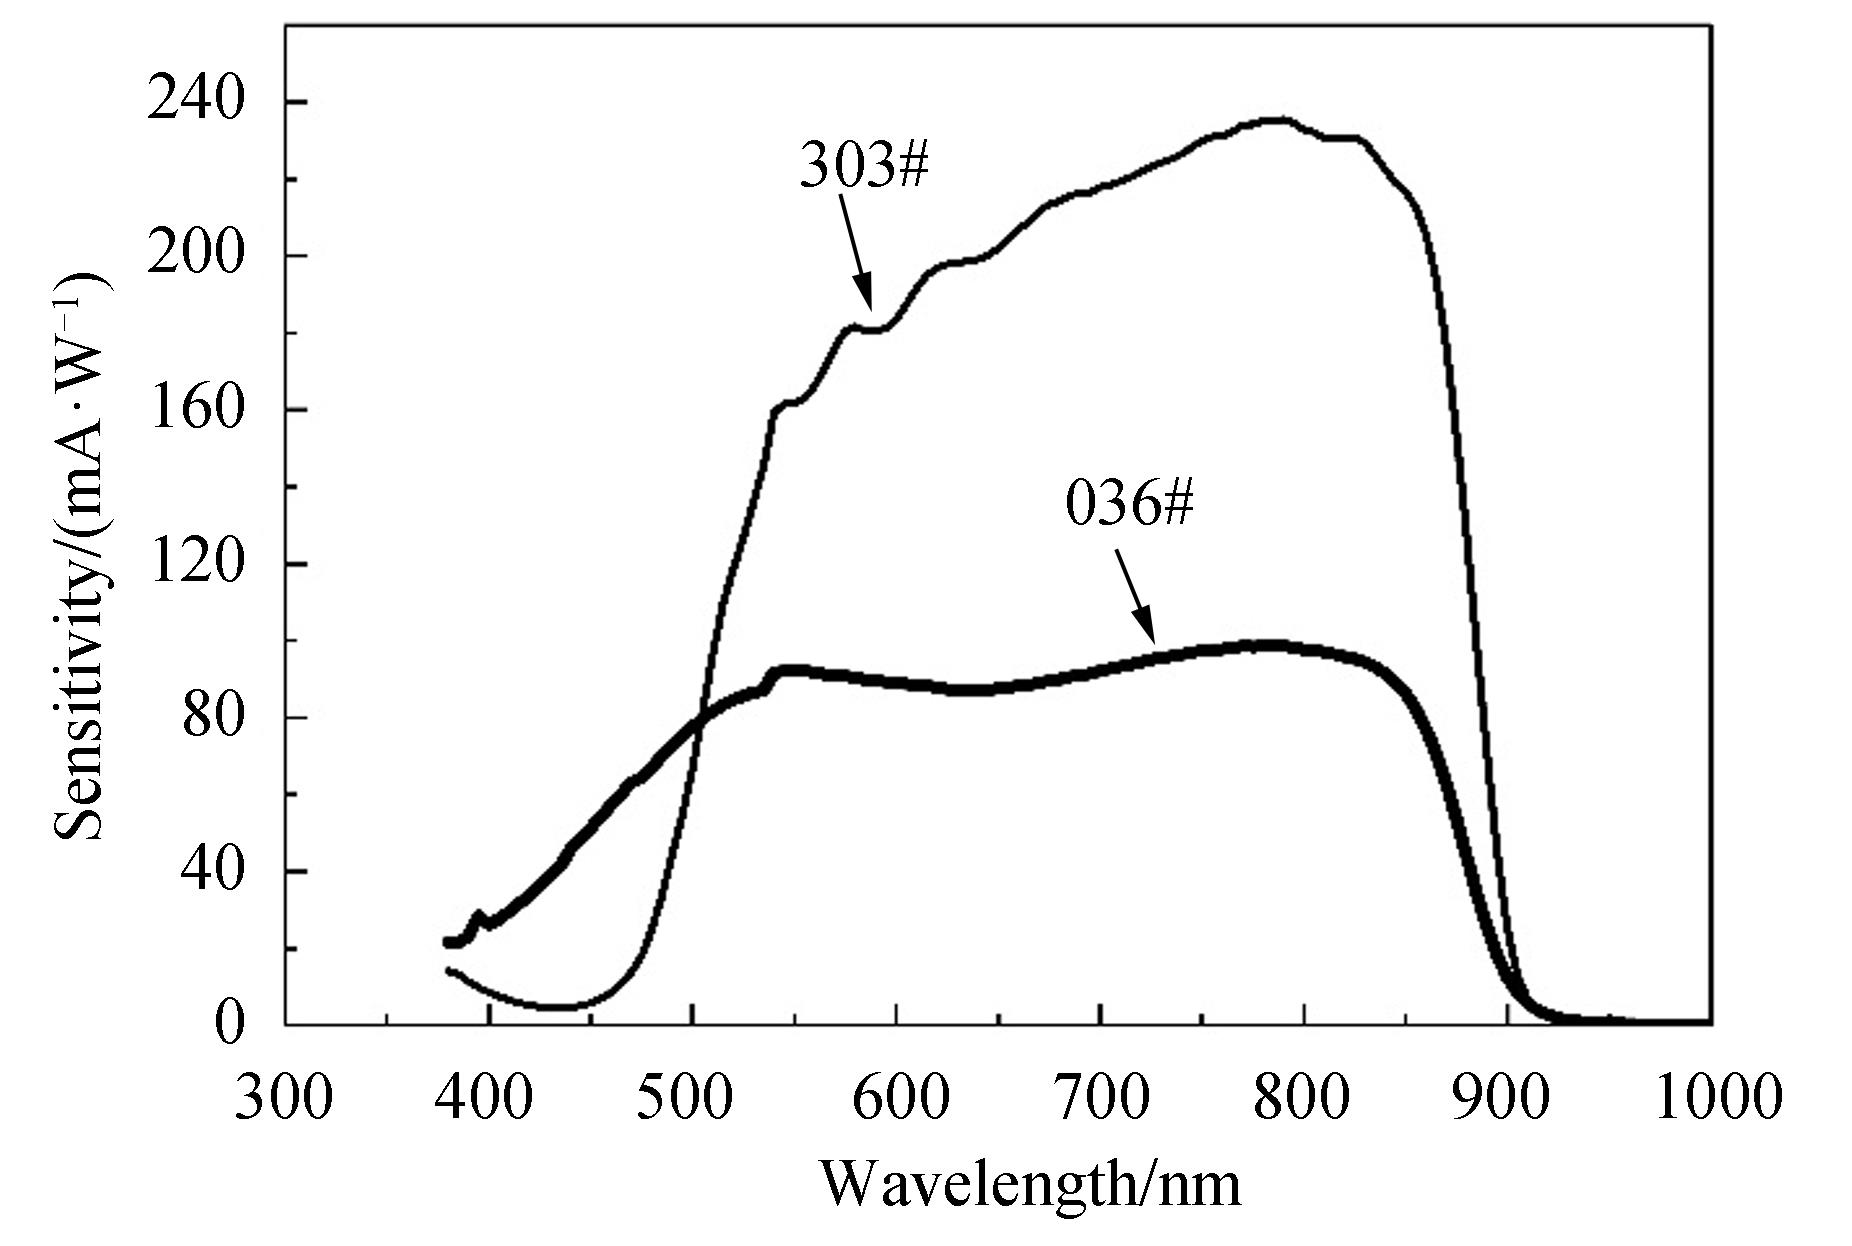 Spectral response of photocathode between sample 036# and 303#